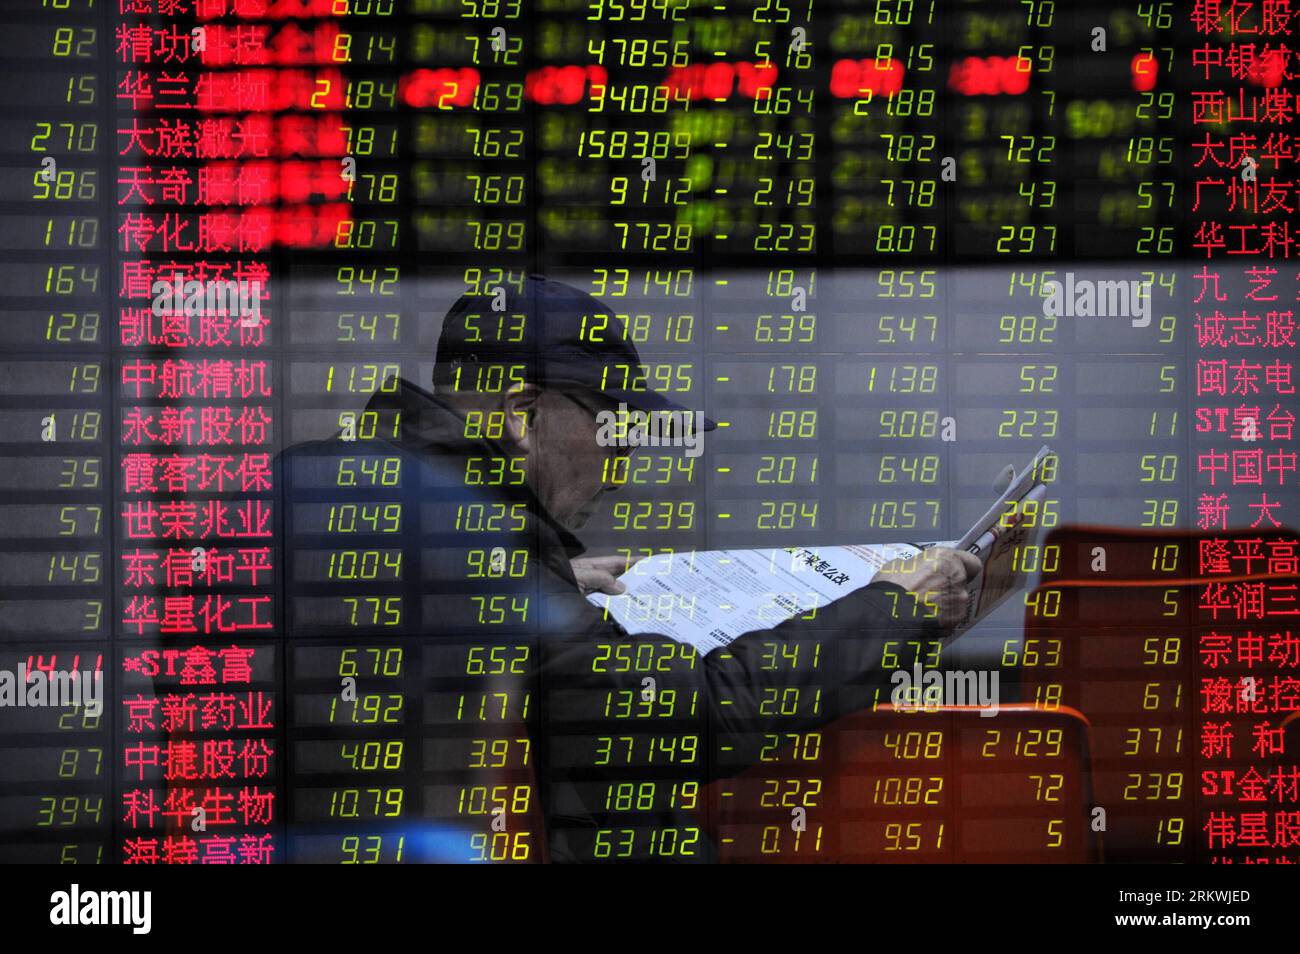 Bildnummer: 58696475  Datum: 13.11.2012  Copyright: imago/Xinhua (121113) -- HANGZHOU, Nov. 13, 2012 (Xinhua) -- An investor reads newspaper before the stock price monitor at a stock trading hall in Hangzhou, capital of east China s Zhejiang Province, Nov. 13, 2012. Chinese stocks experienced a decline on Tuesday. The benchmark Shanghai Composite Index dropped 1.51 percent, to close at 2,047.89 points. The Shenzhen Component Index ended at 8,234.60 points, down 1.87 percent. (Xinhua/Ju Huanzong) (zc) CHINA-STOCKS-DOWN (CN) PUBLICATIONxNOTxINxCHN Wirtschaft Börse Kurs Aktien Aktienkurs Börsenku Stock Photo